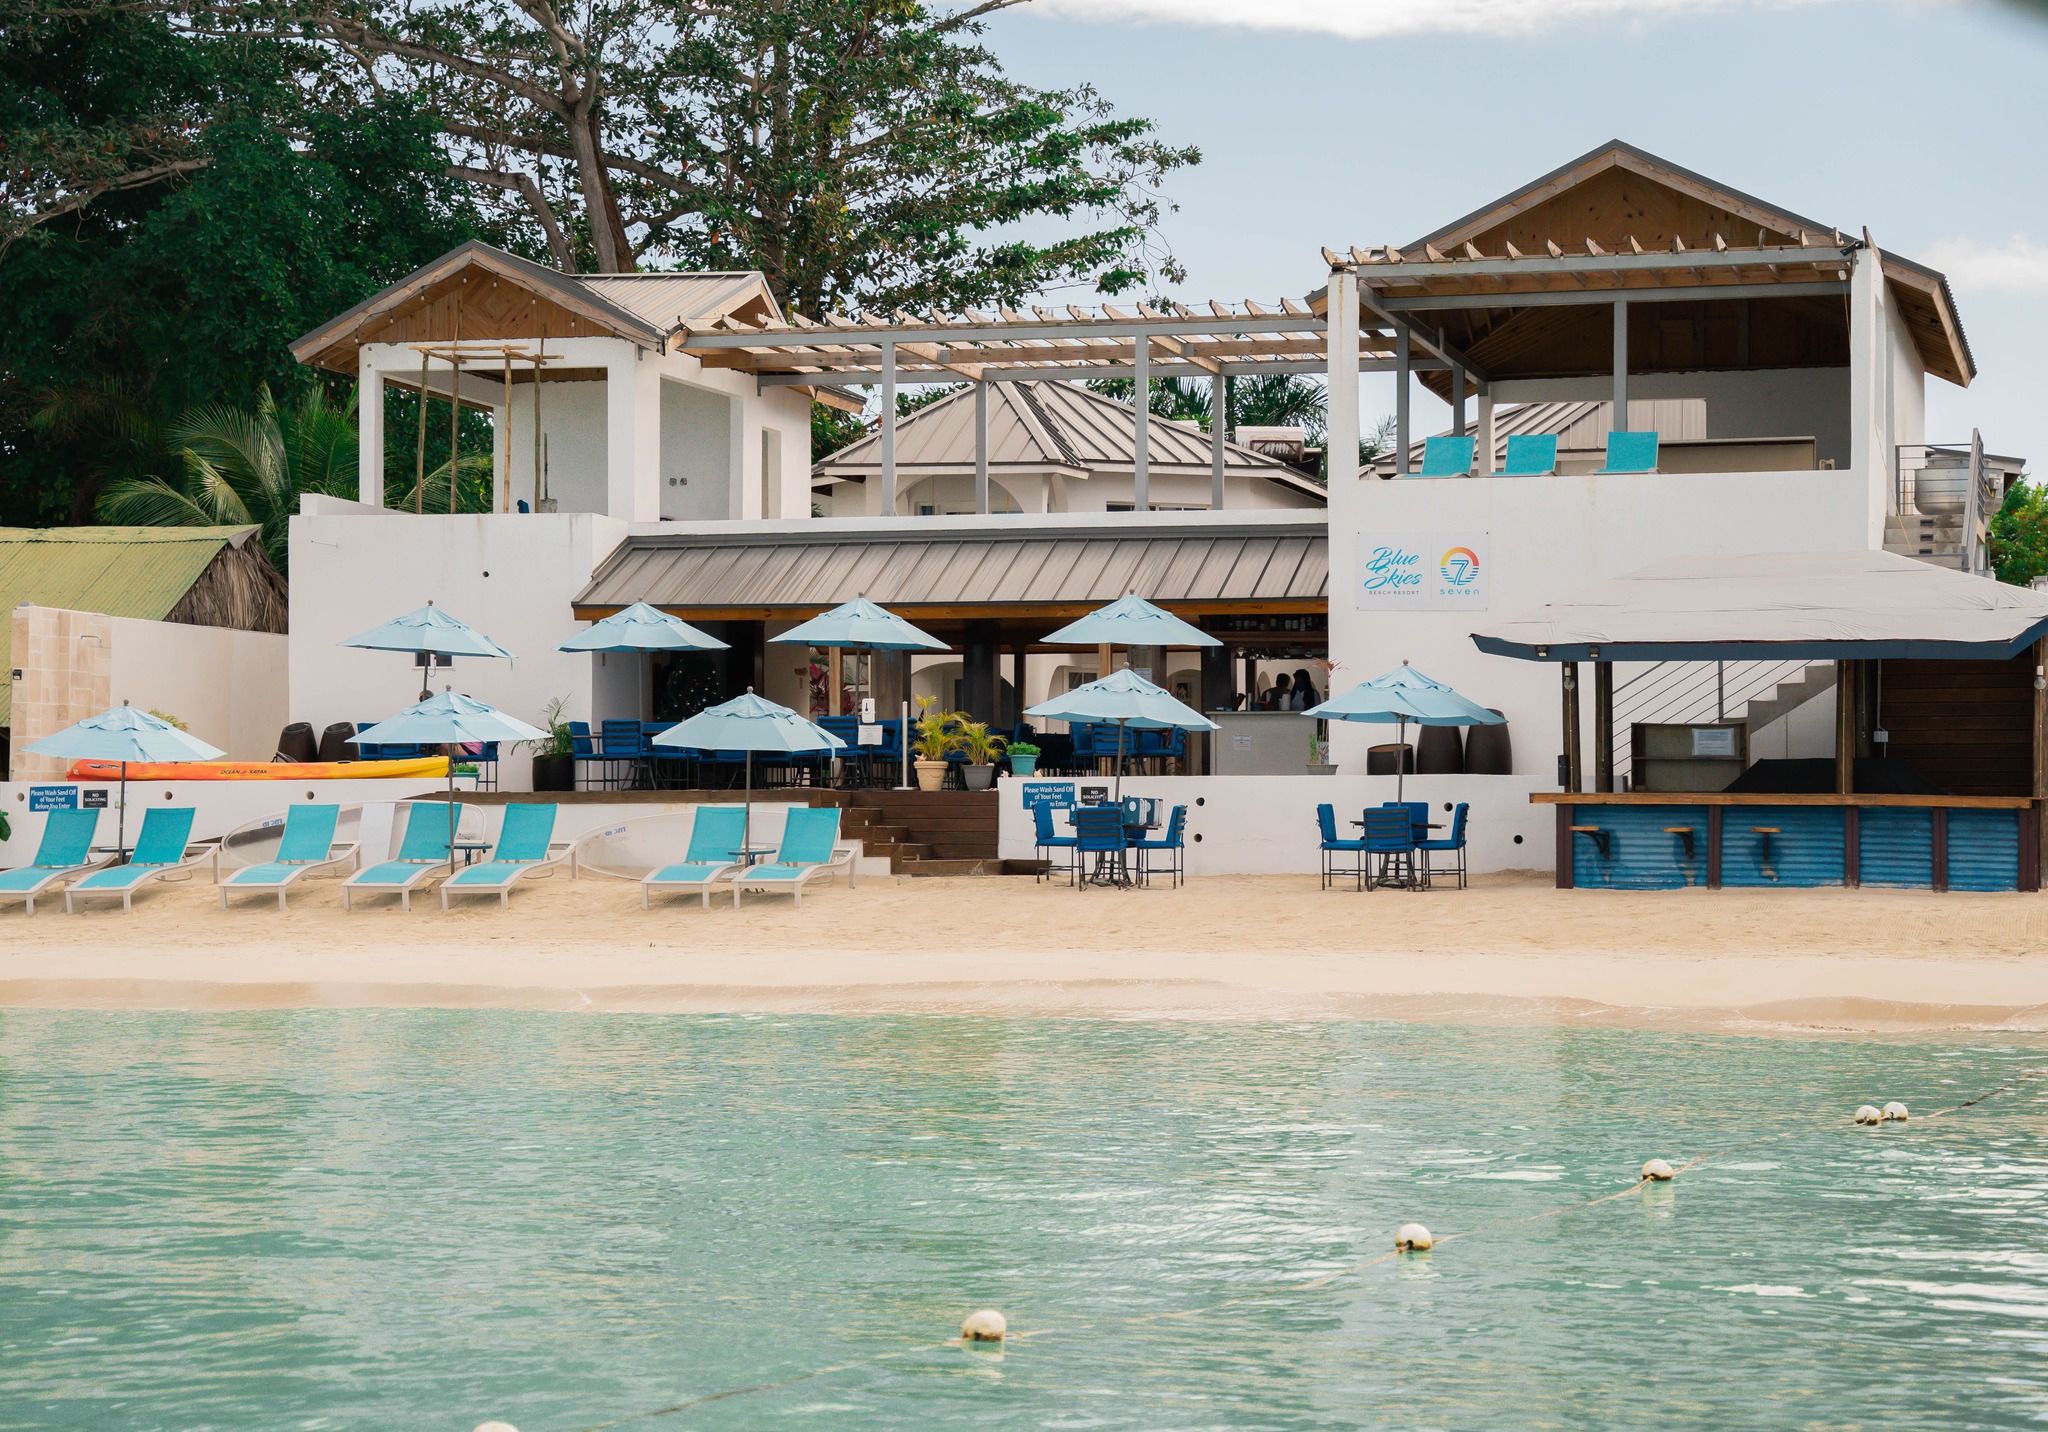 A History Buff’s Guide to Negril: Heritage and Landmarks